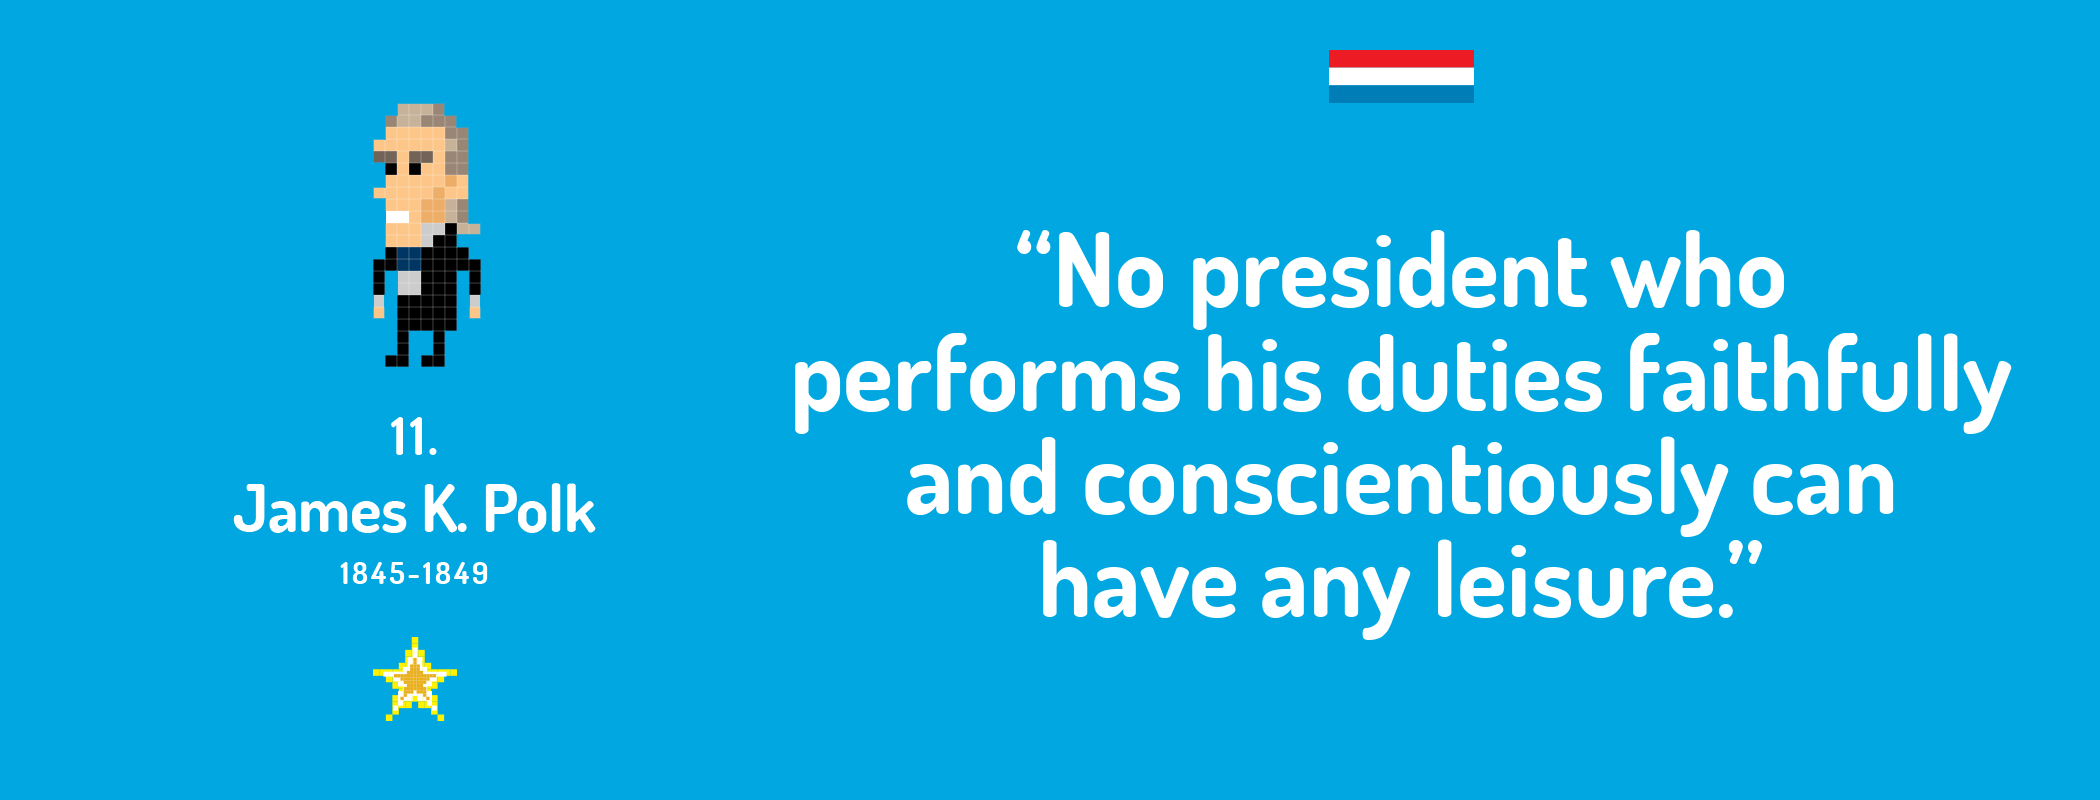 No president who performs his duties faithfully and conscientiously can have any leisure.